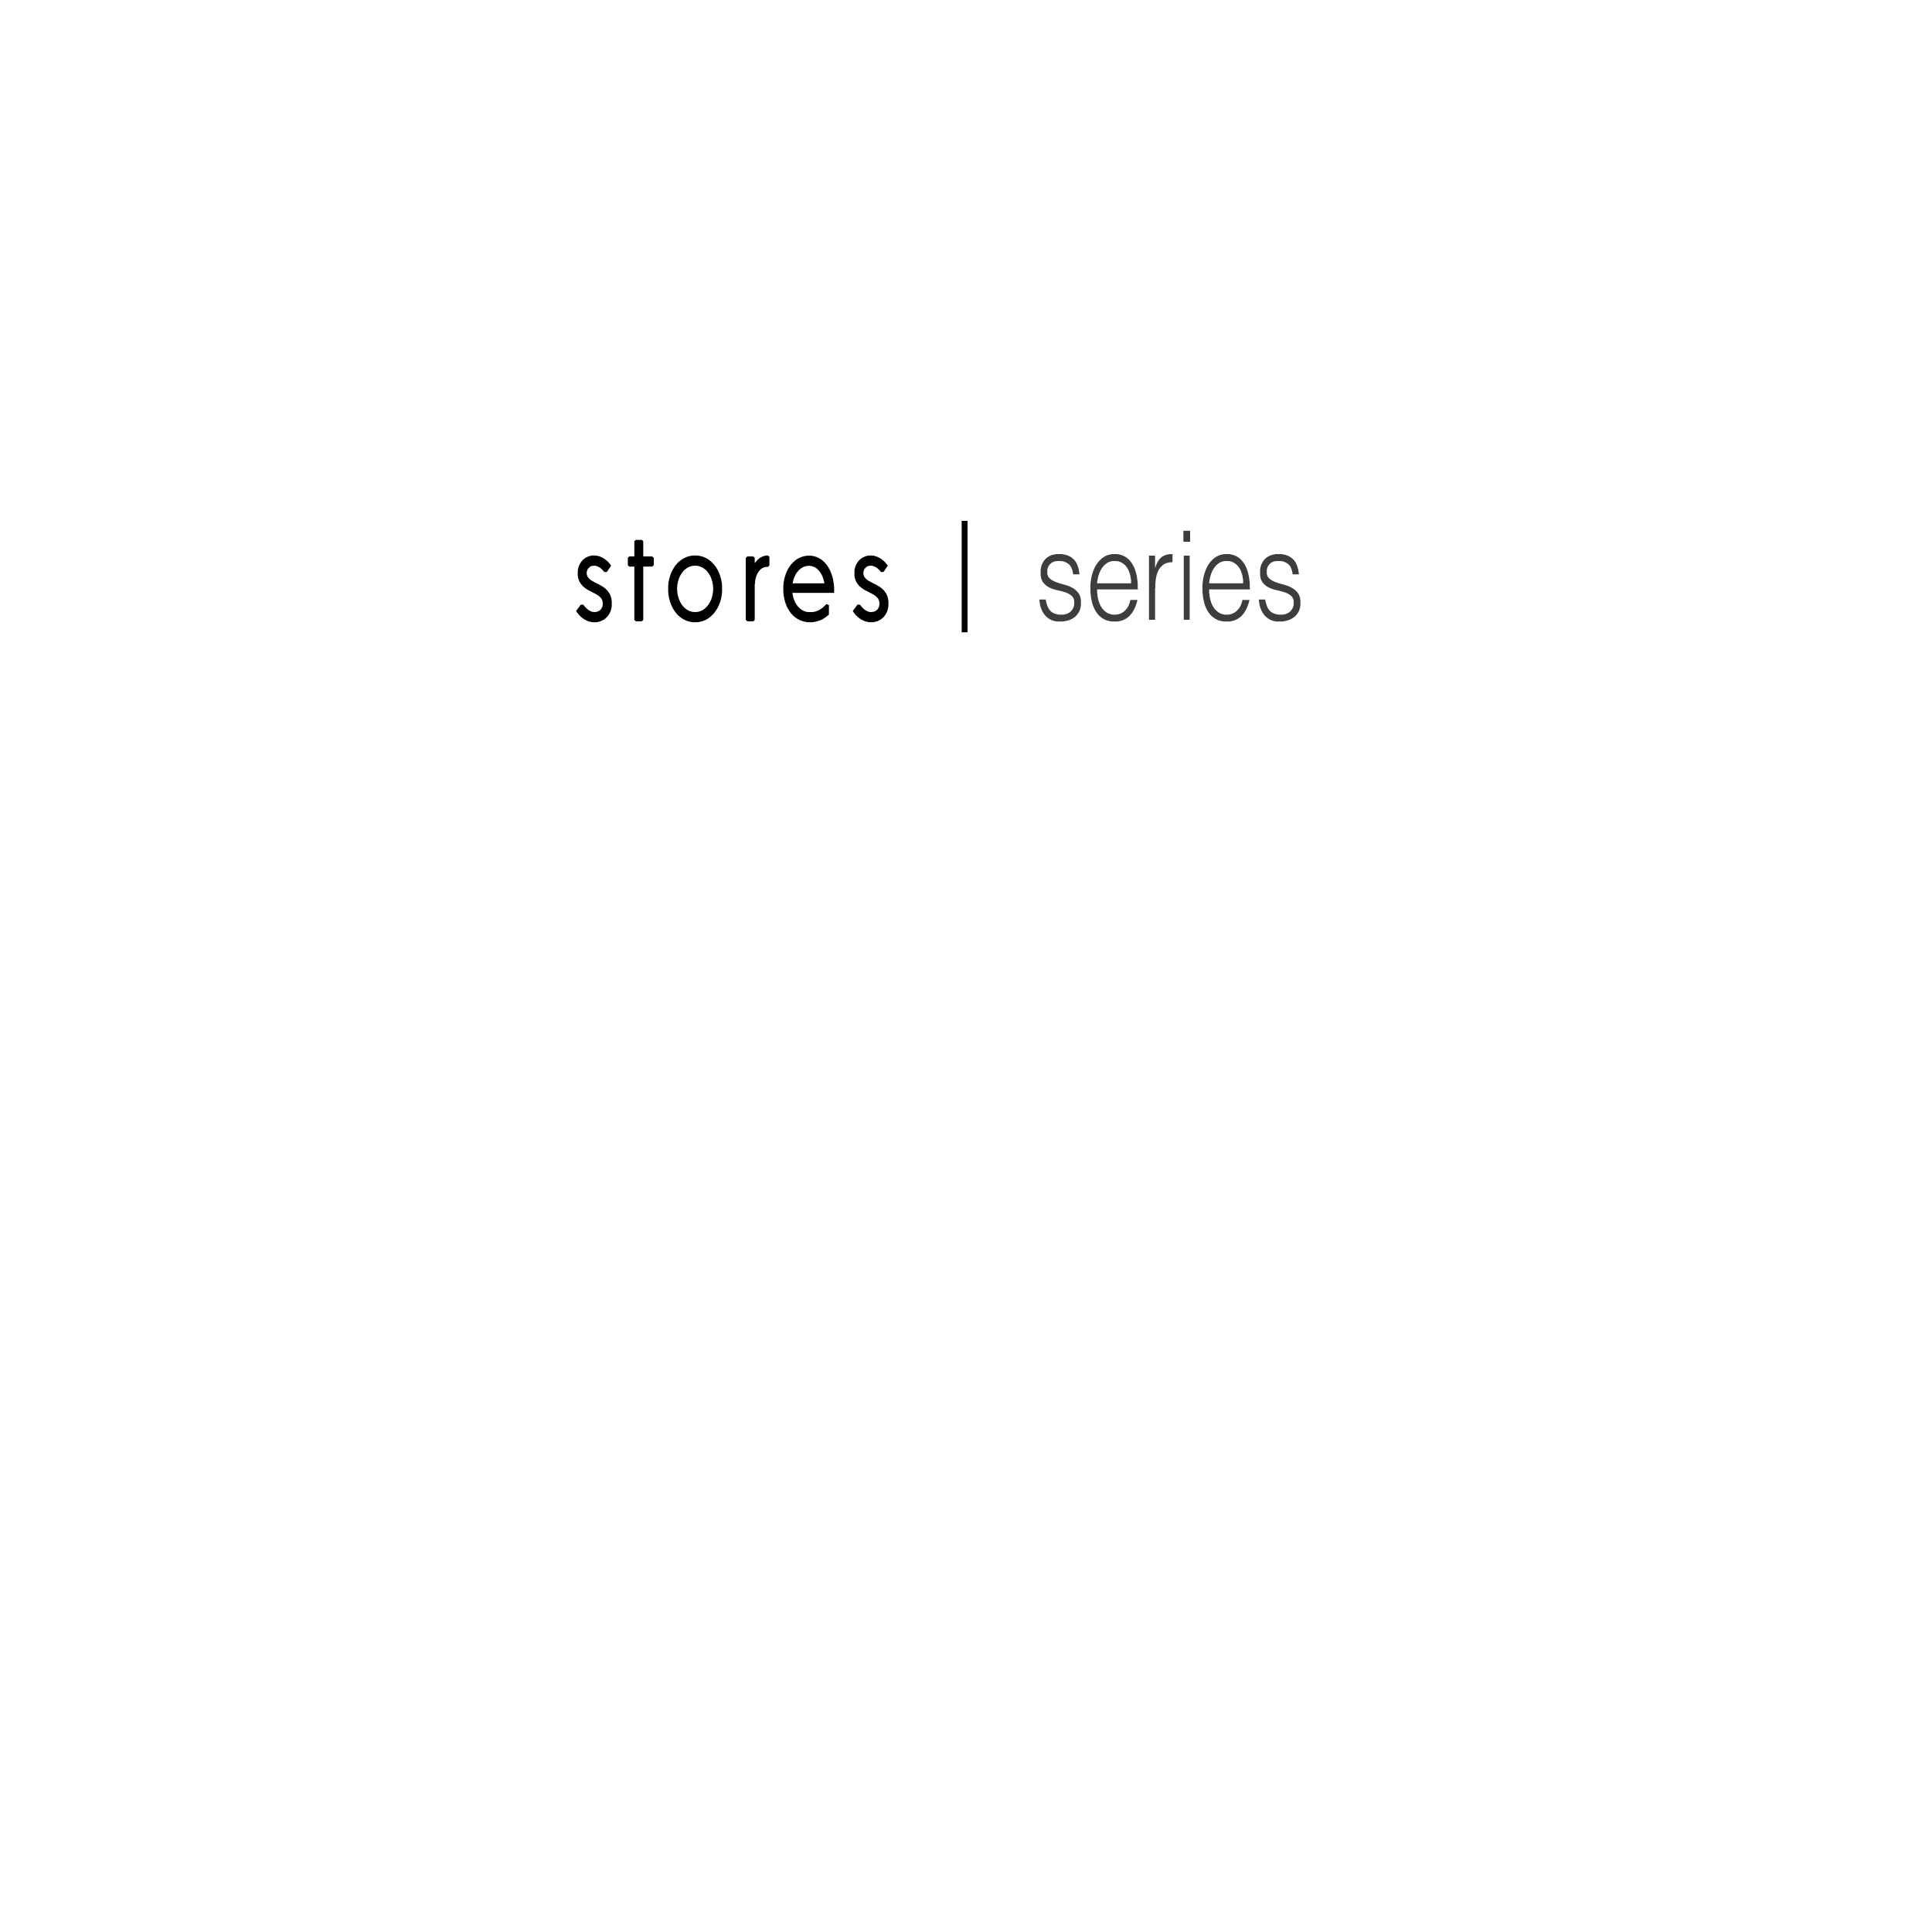 Title stores series.jpg